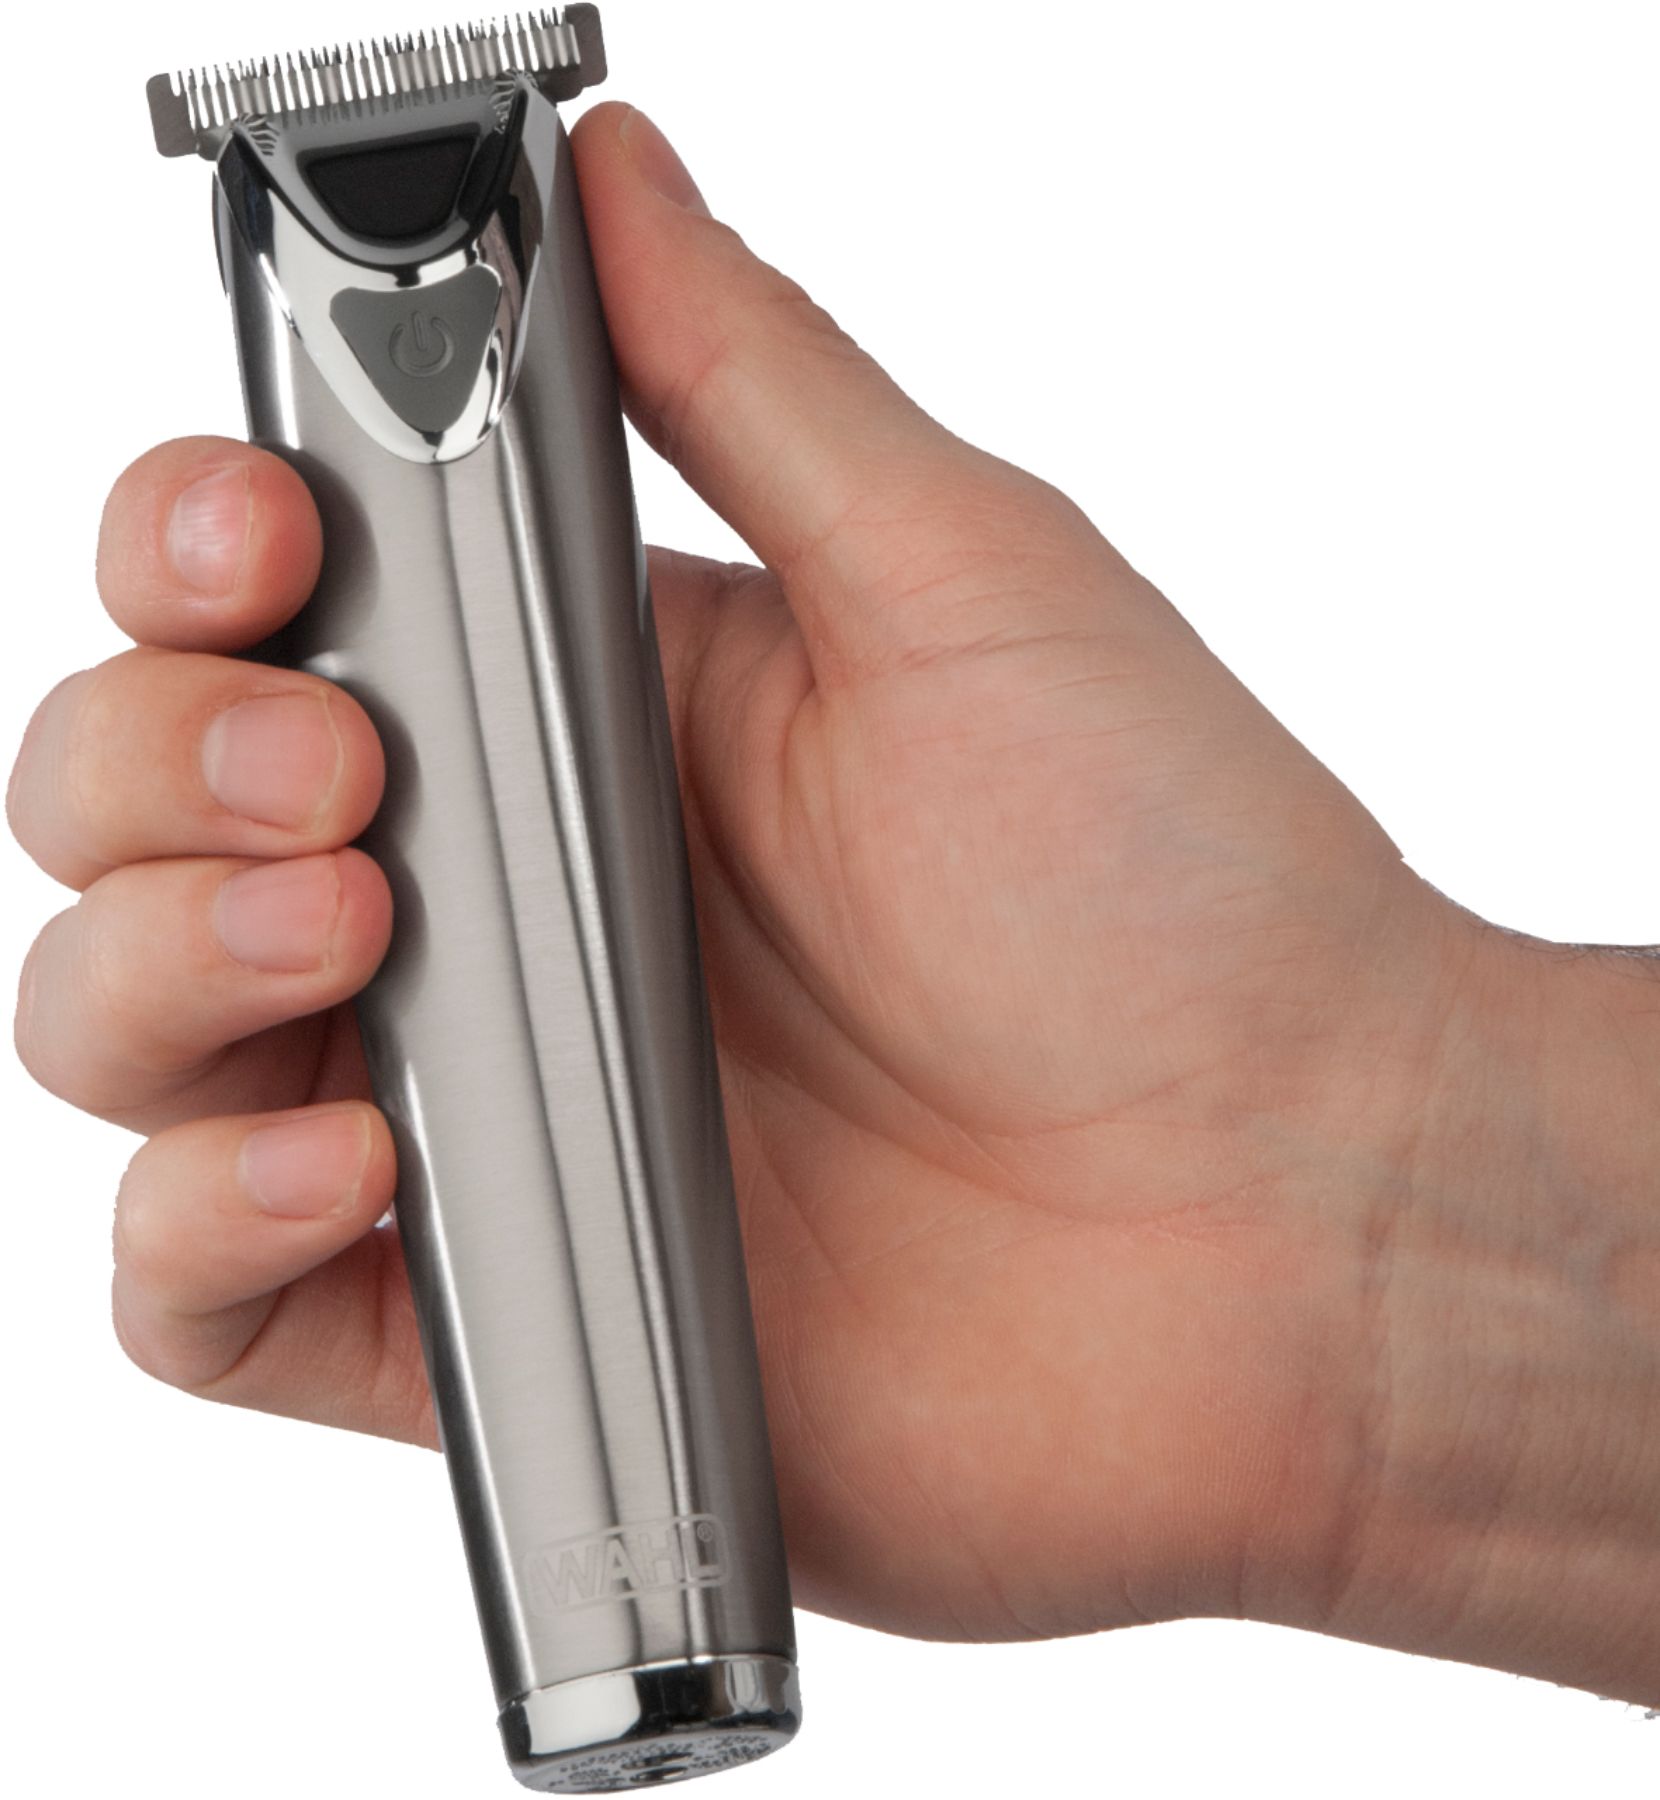 Best Buy: Wahl Lithium Ion All-In-One Trimmer Stainless-Steel 9818 Wahl Lithium Ion Trimmer Stainless Steel